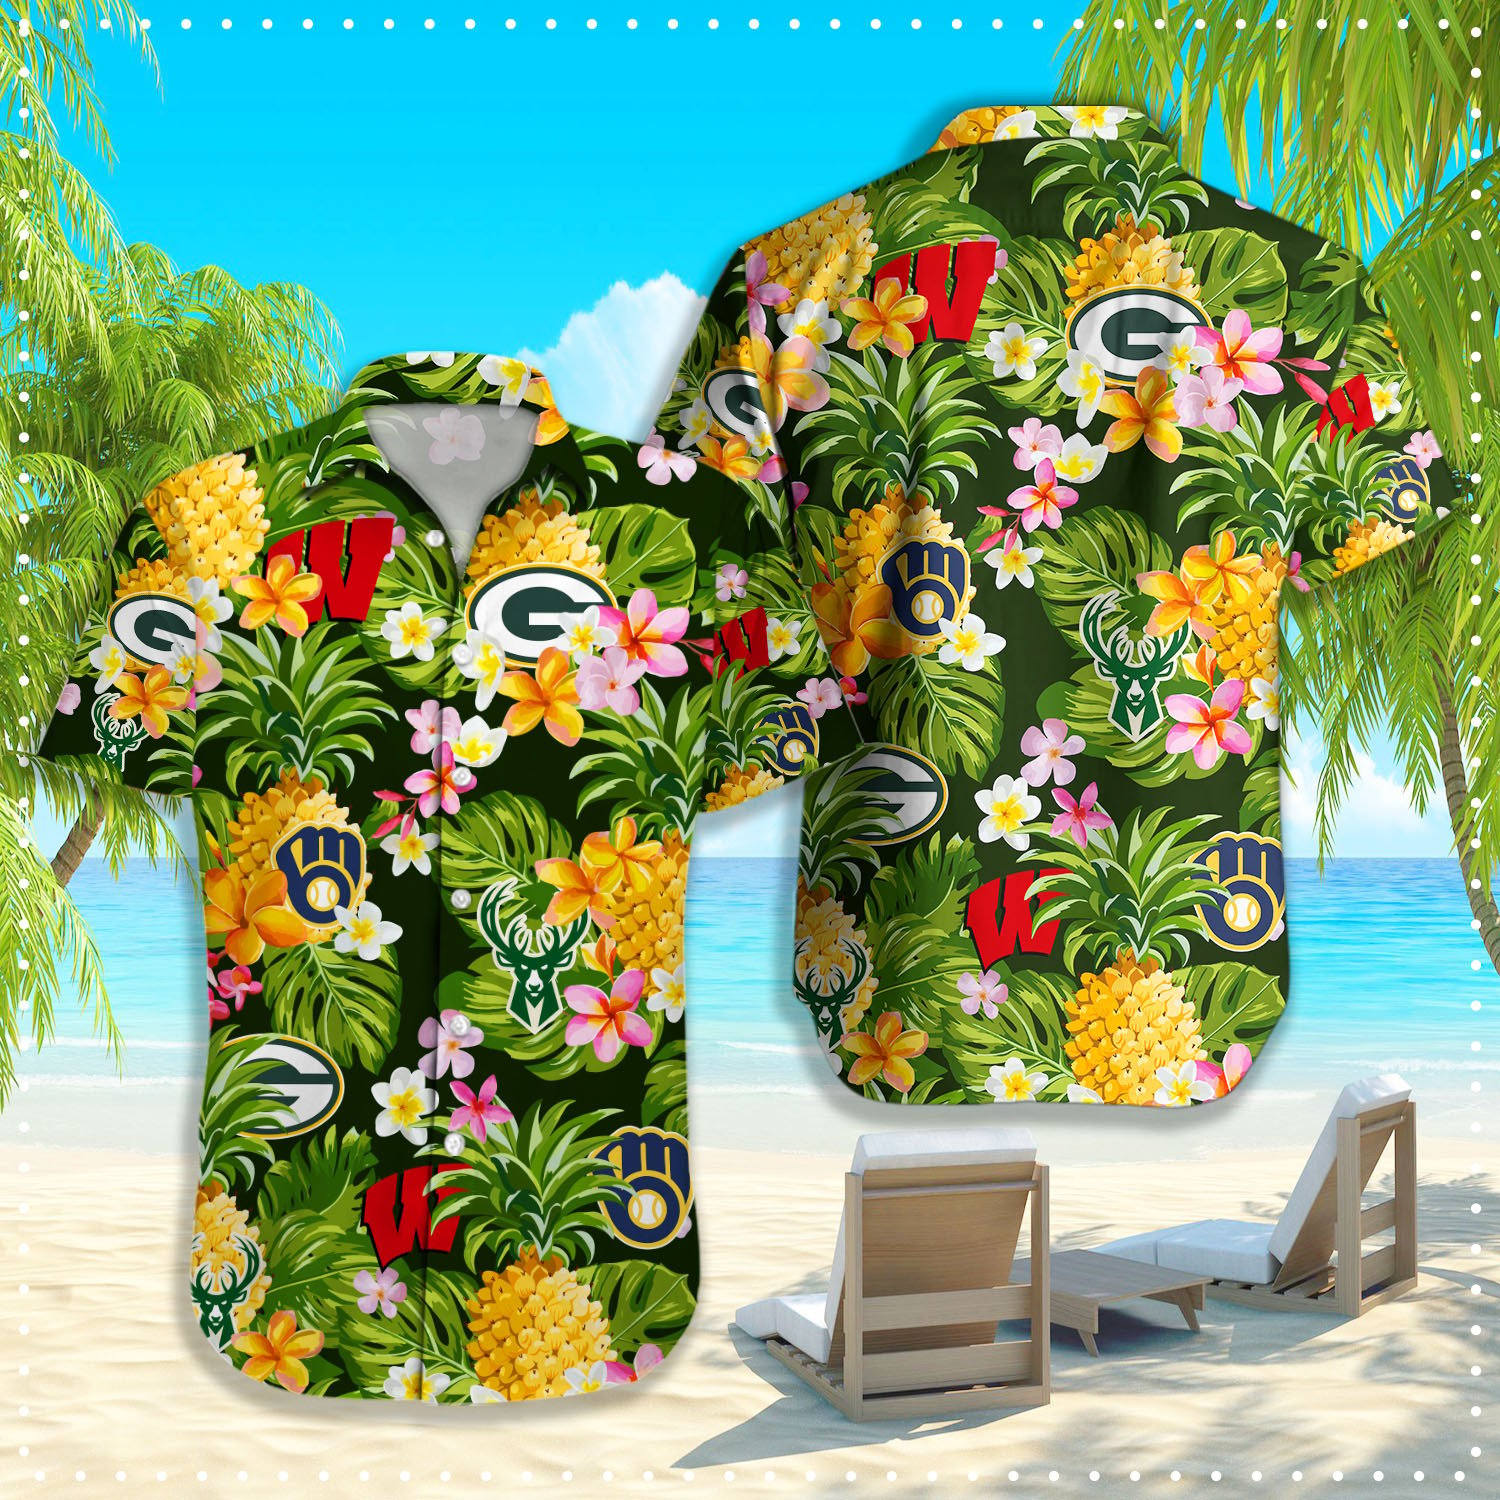 If you're looking for a NHL Hawaiian shirt to wear, don't wait until the last minute! 202